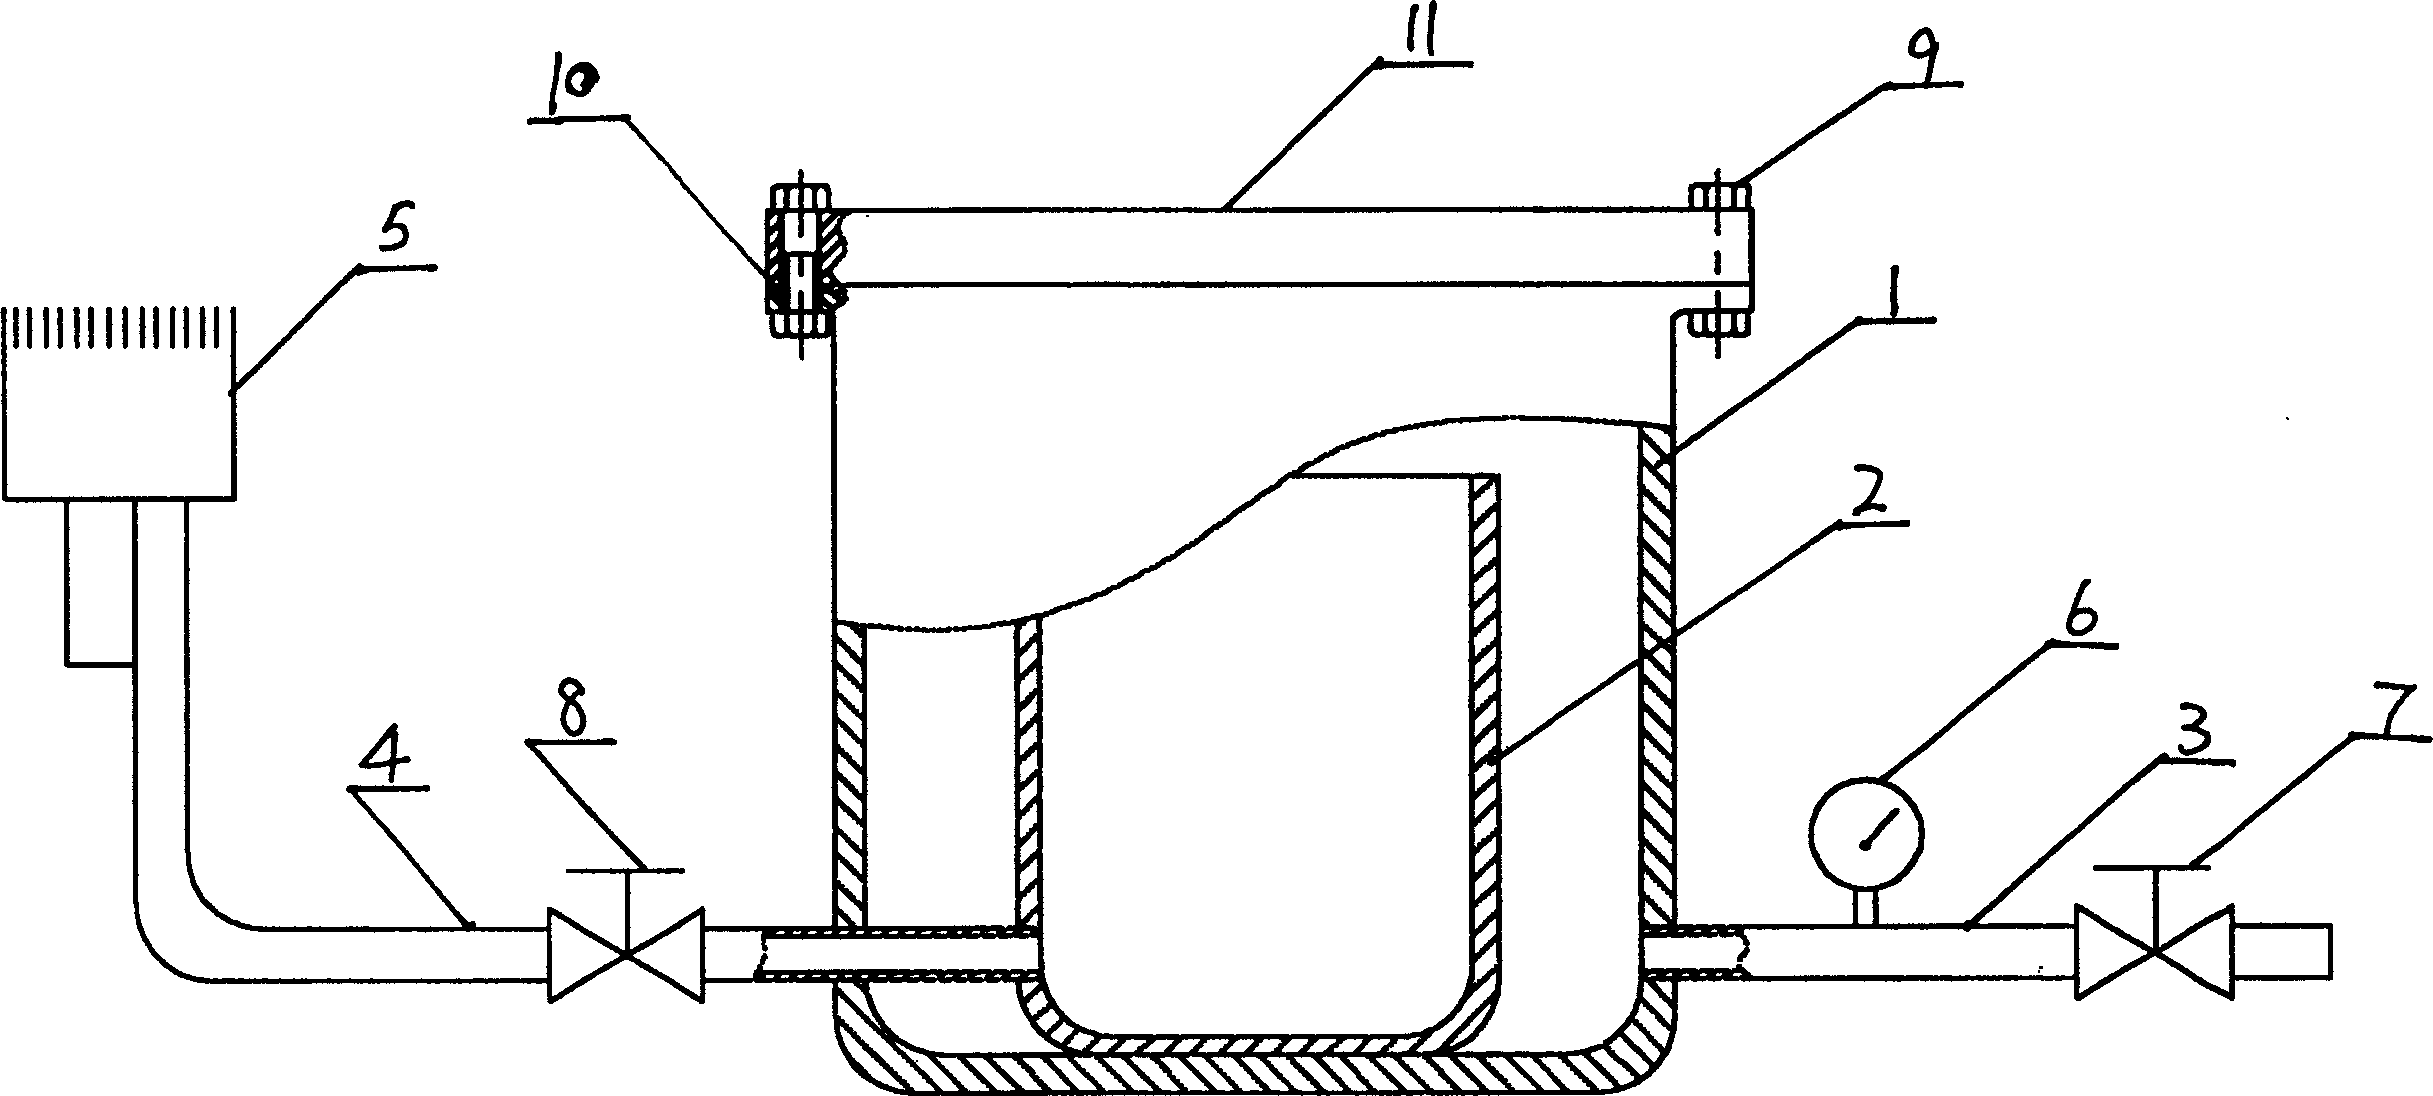 Adhesive supply device for automatically brushing adhesive